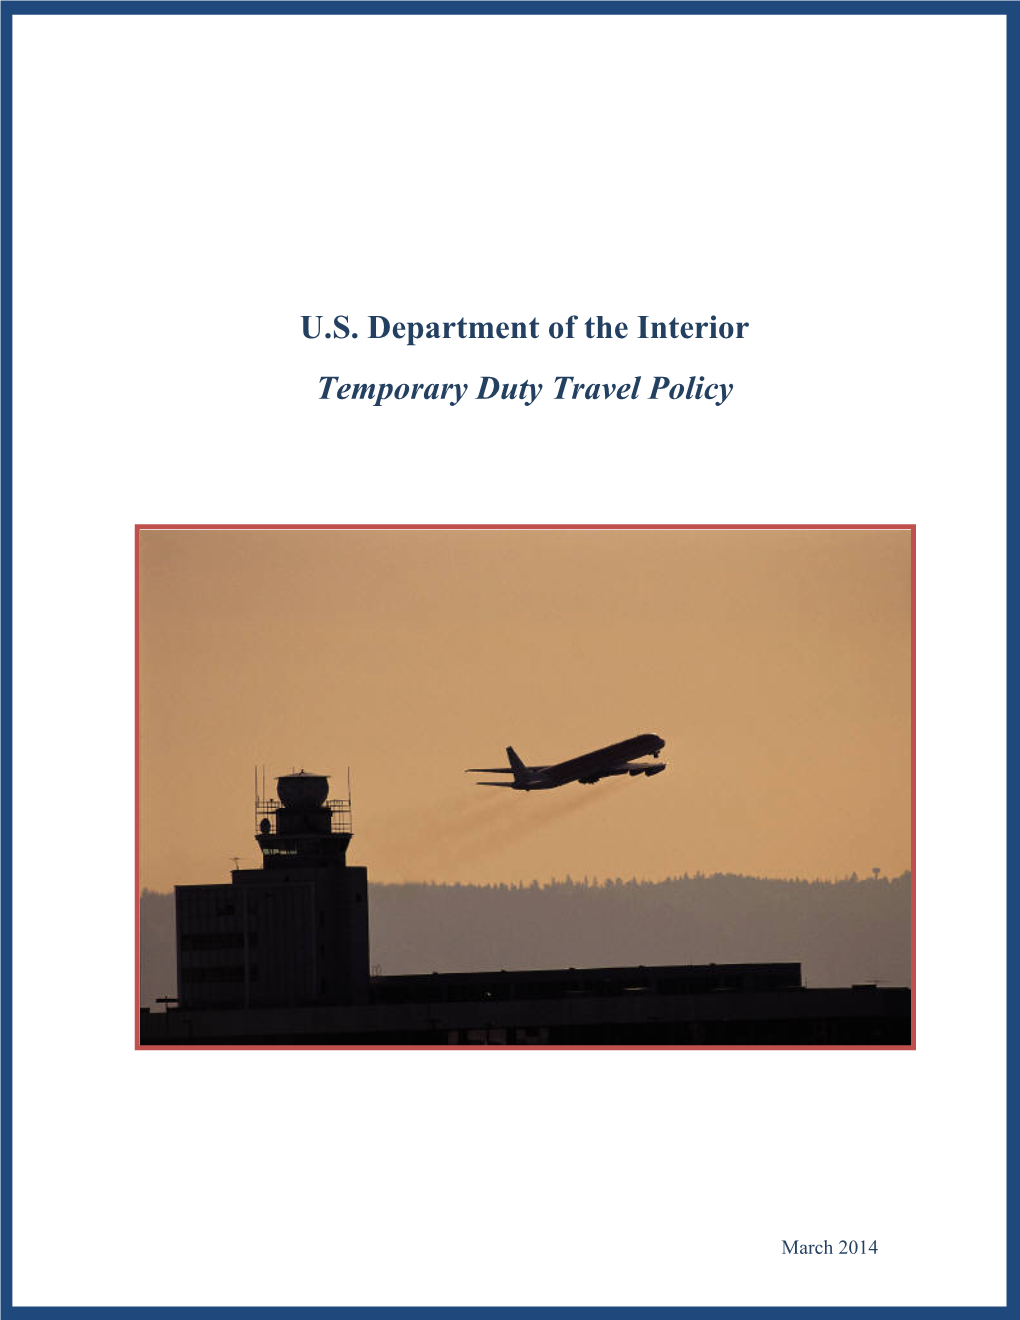 U.S. Department of the Interior Temporary Duty Travel Policy